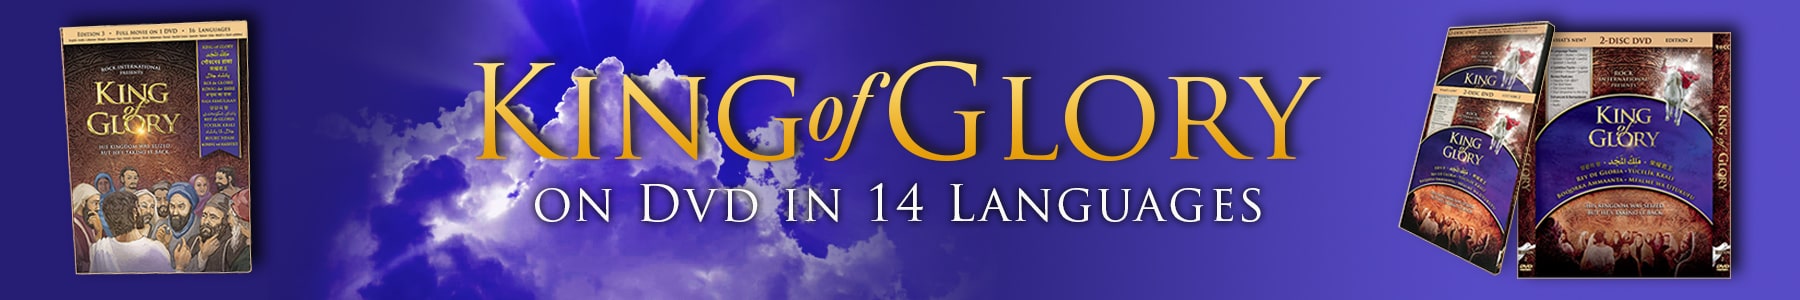 King of Glory Film in 14 Languages